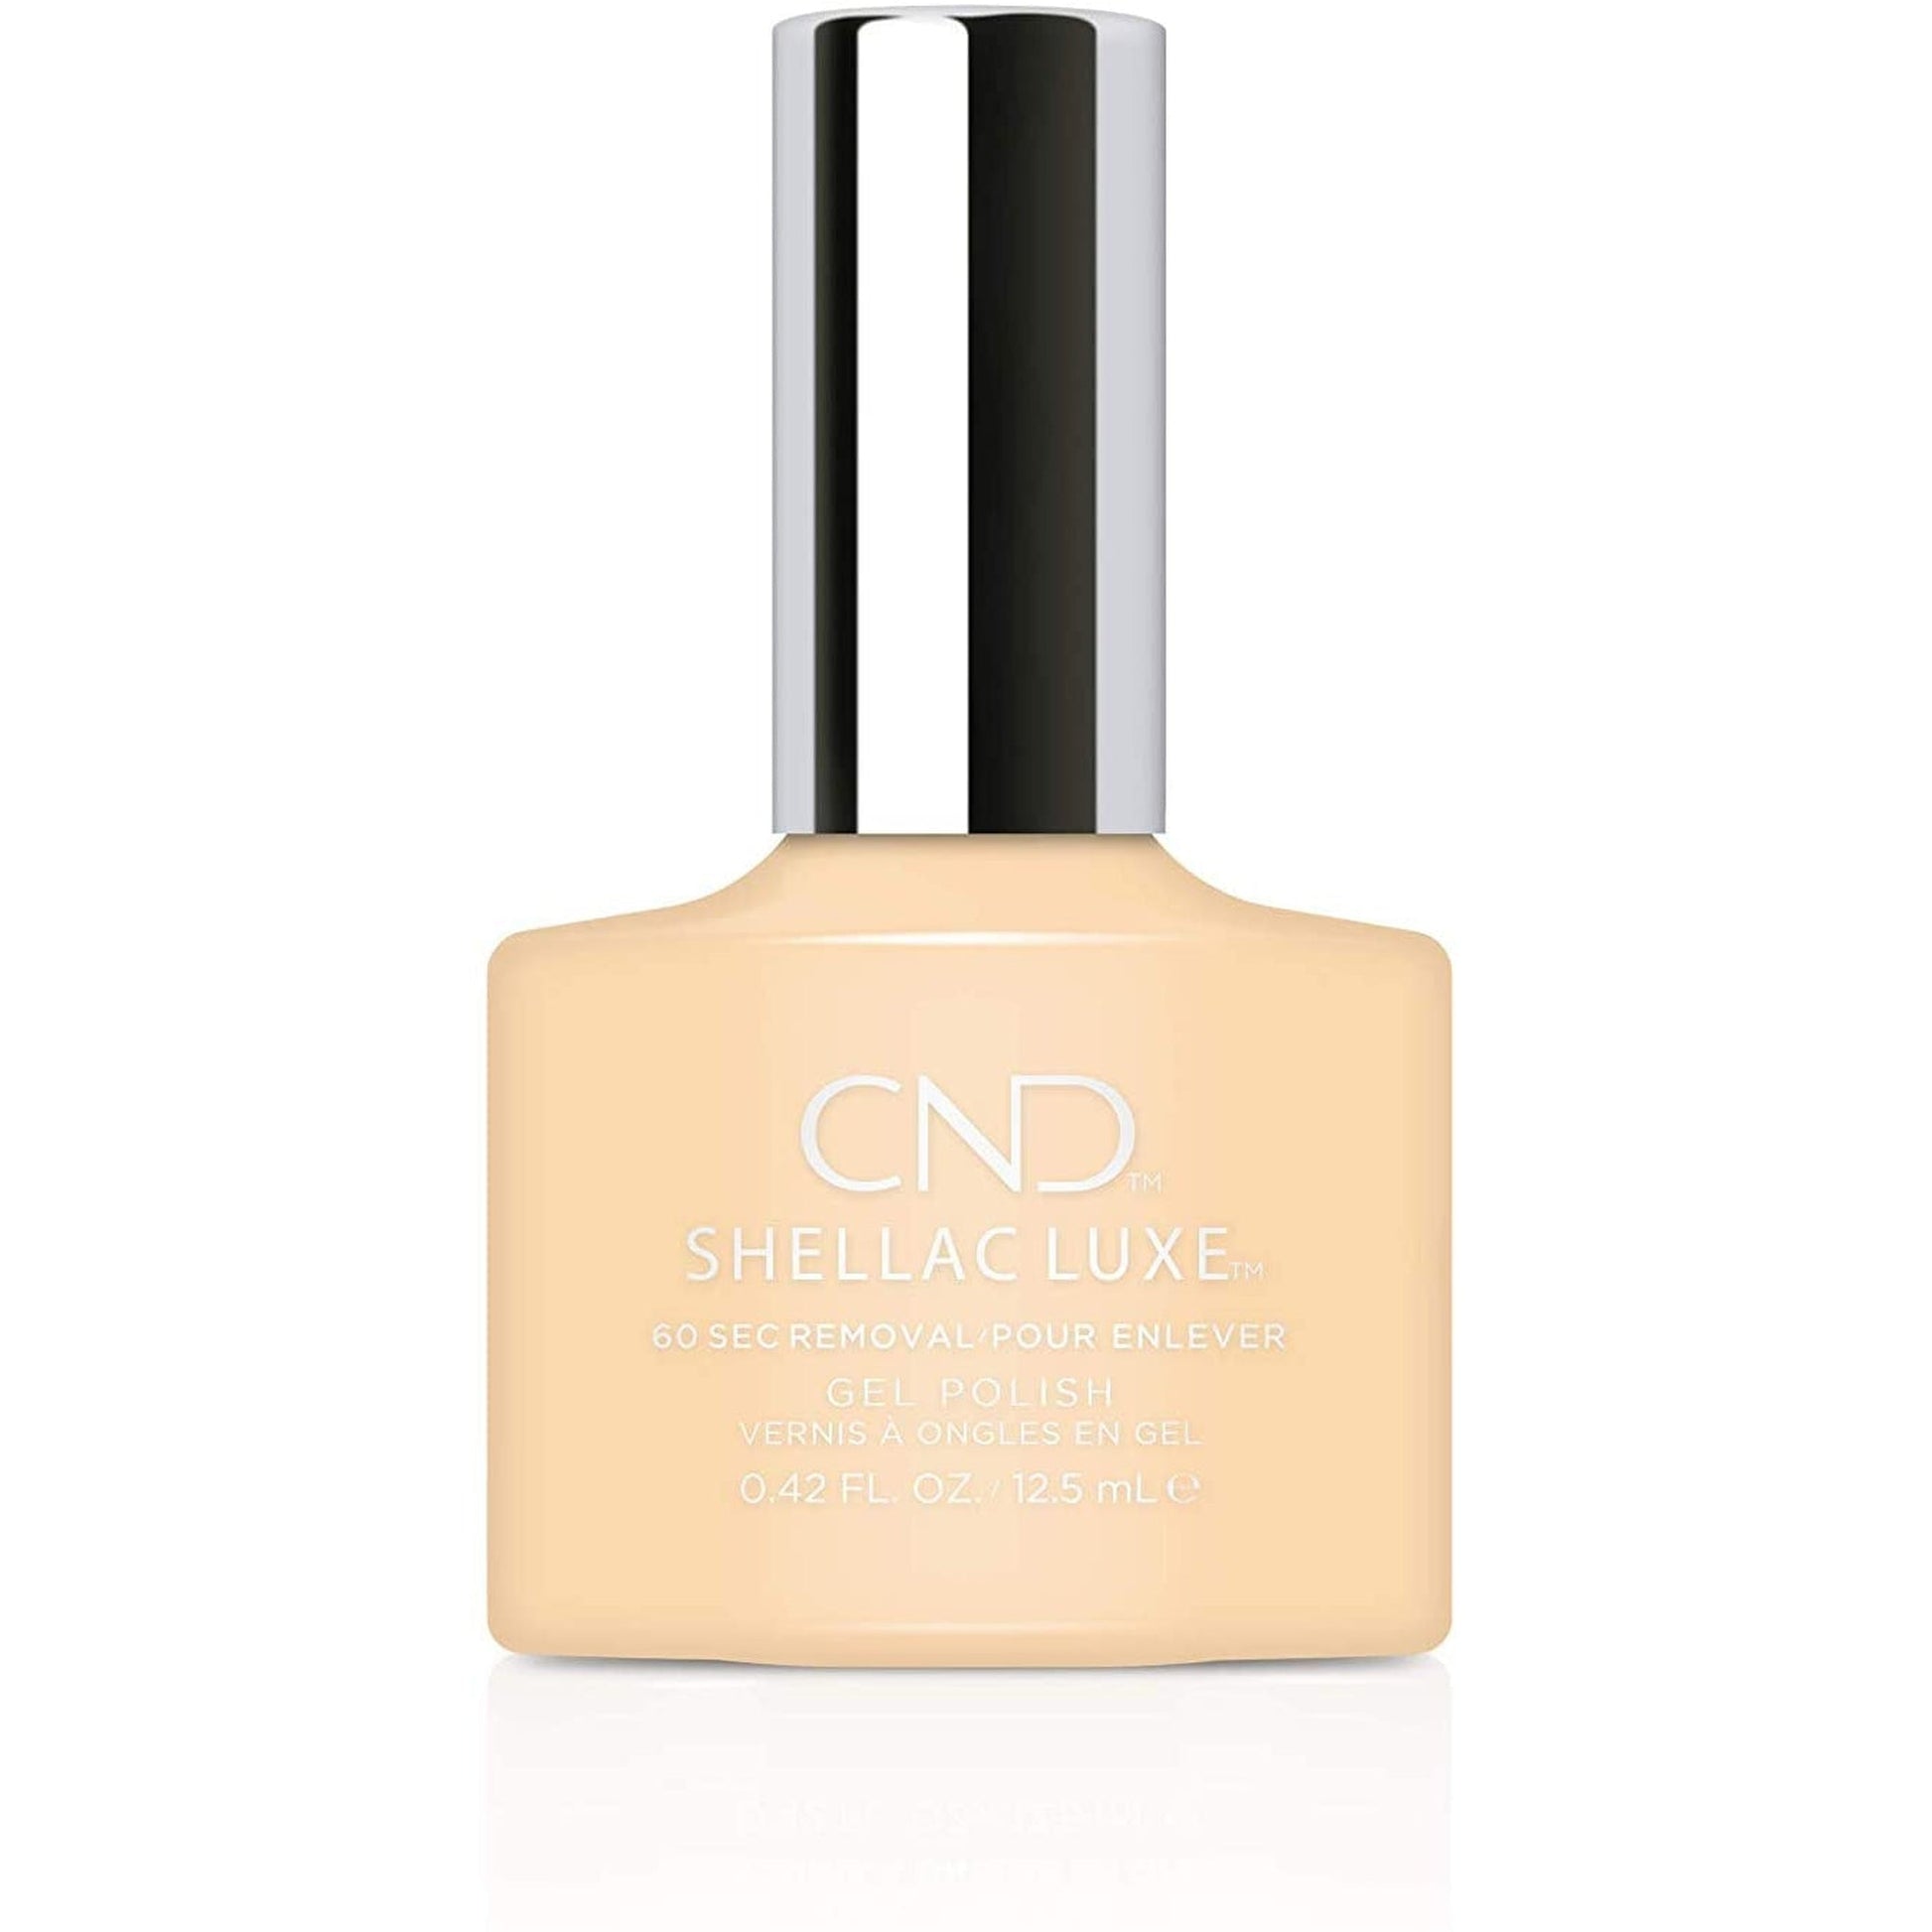 CND Shellac Luxe Gel Polish EXQUISITE #308-CND-BeautyNmakeup.co.uk